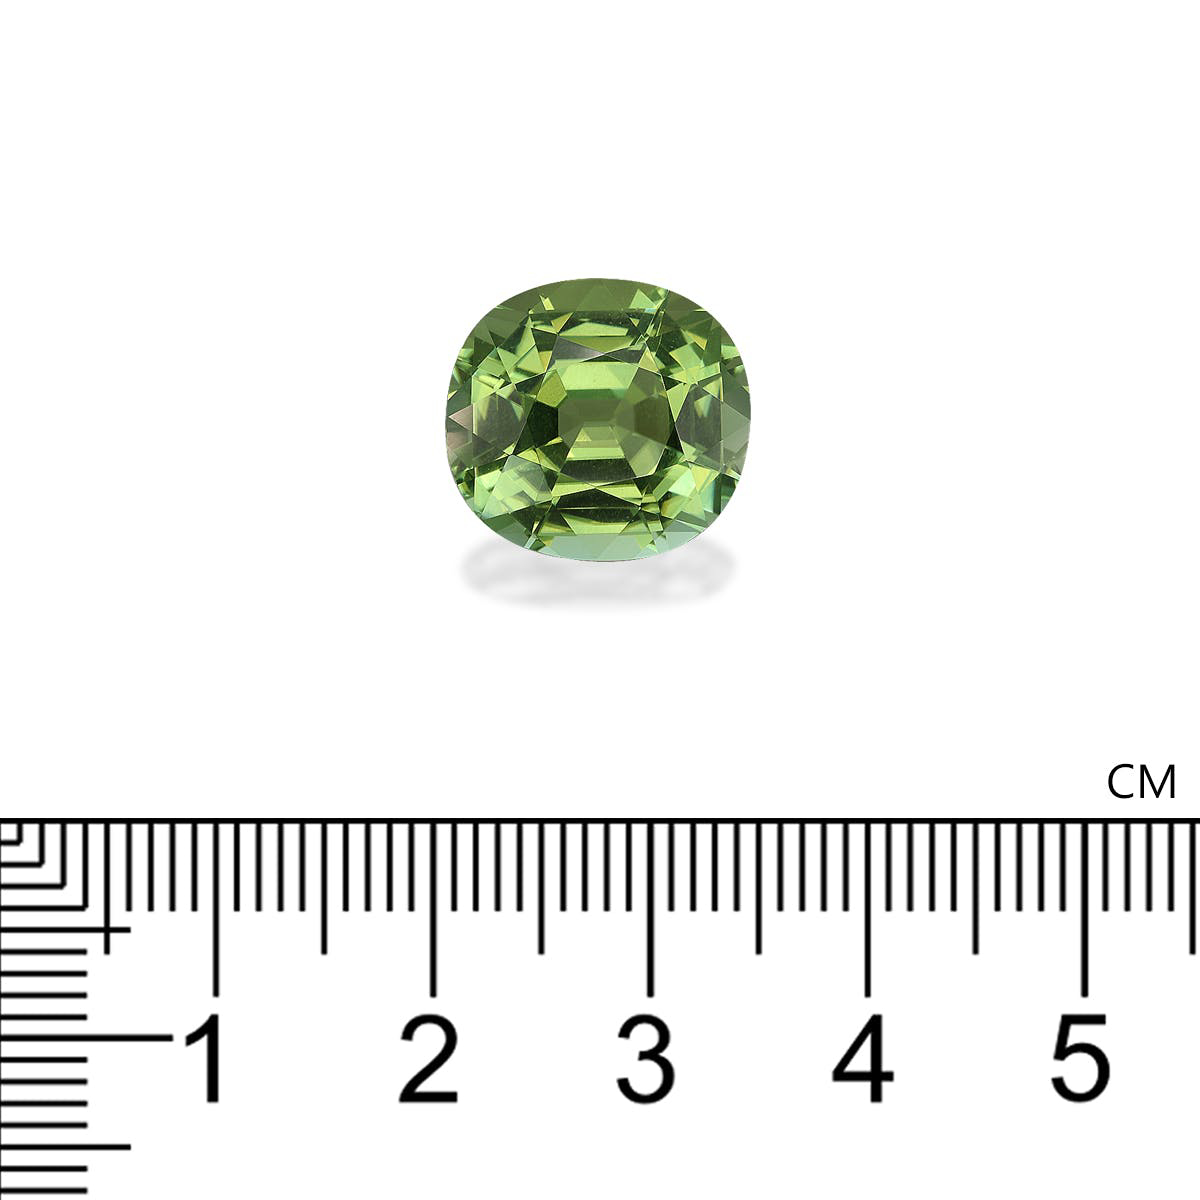 Picture of Pistachio Green Tourmaline 9.14ct (TG0715)